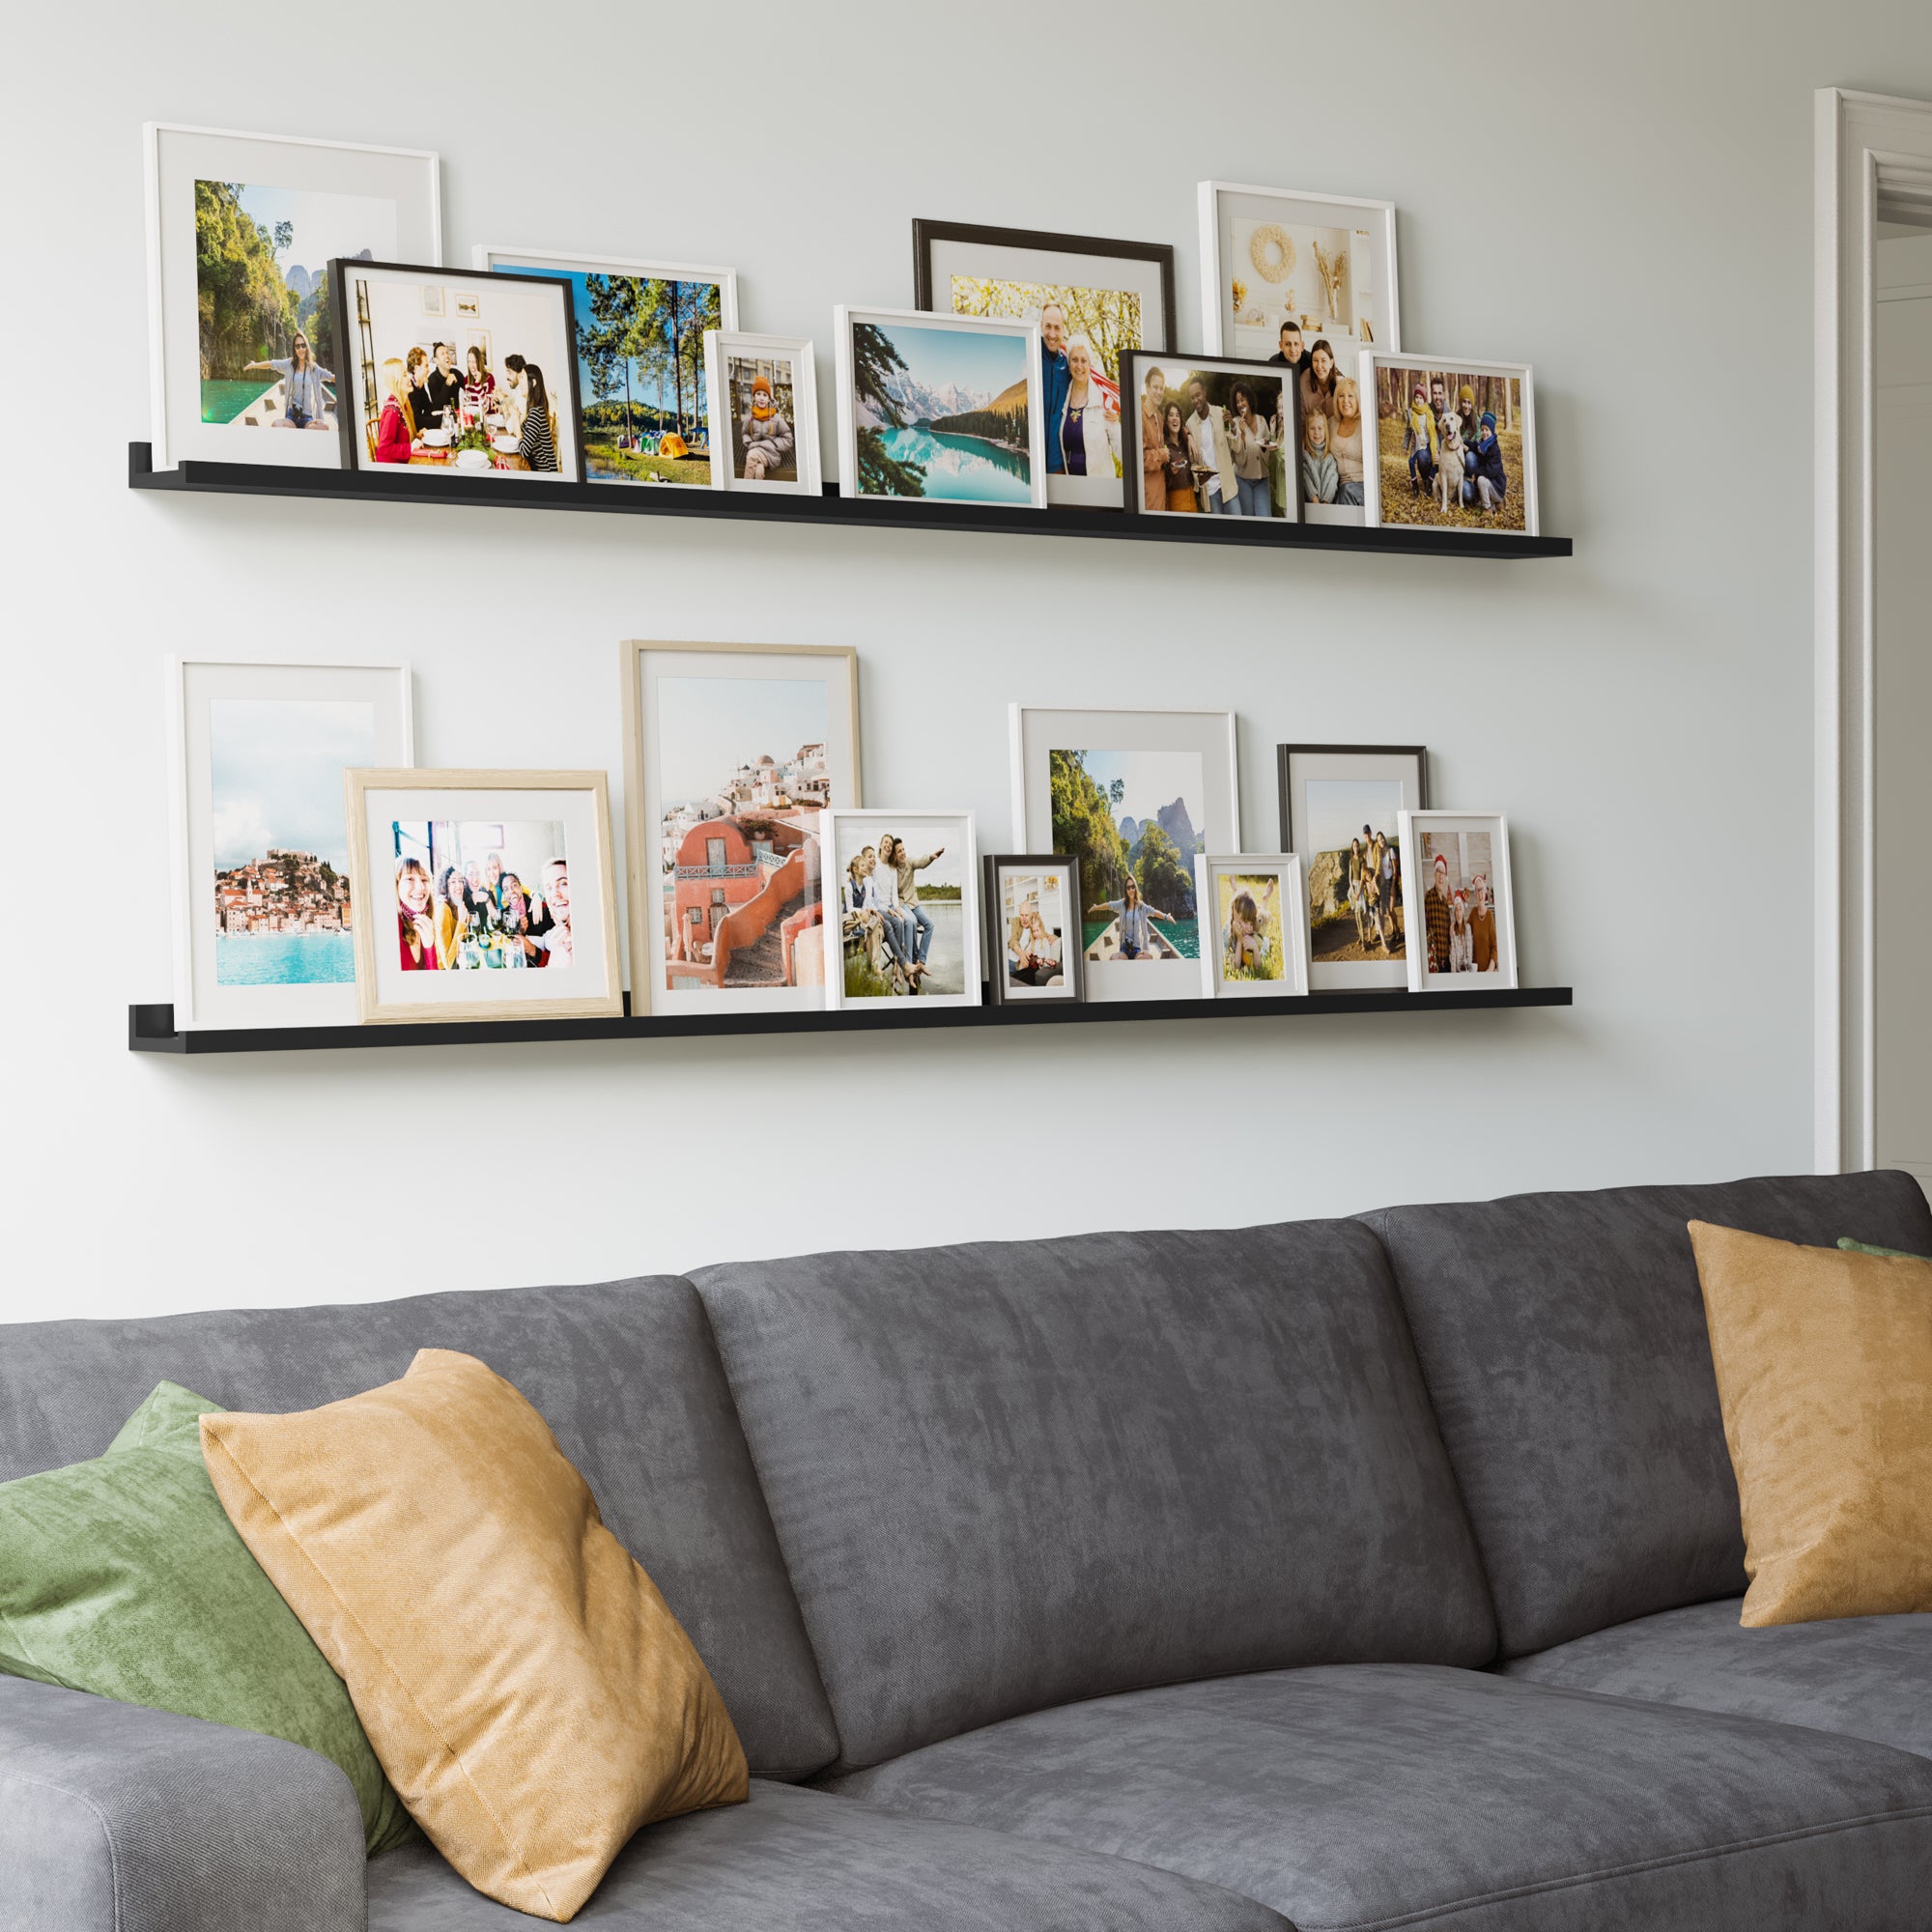 A cozy living space with a grey sofa and colorful pillows, and above it, black shelves filled with a mix of framed photos.